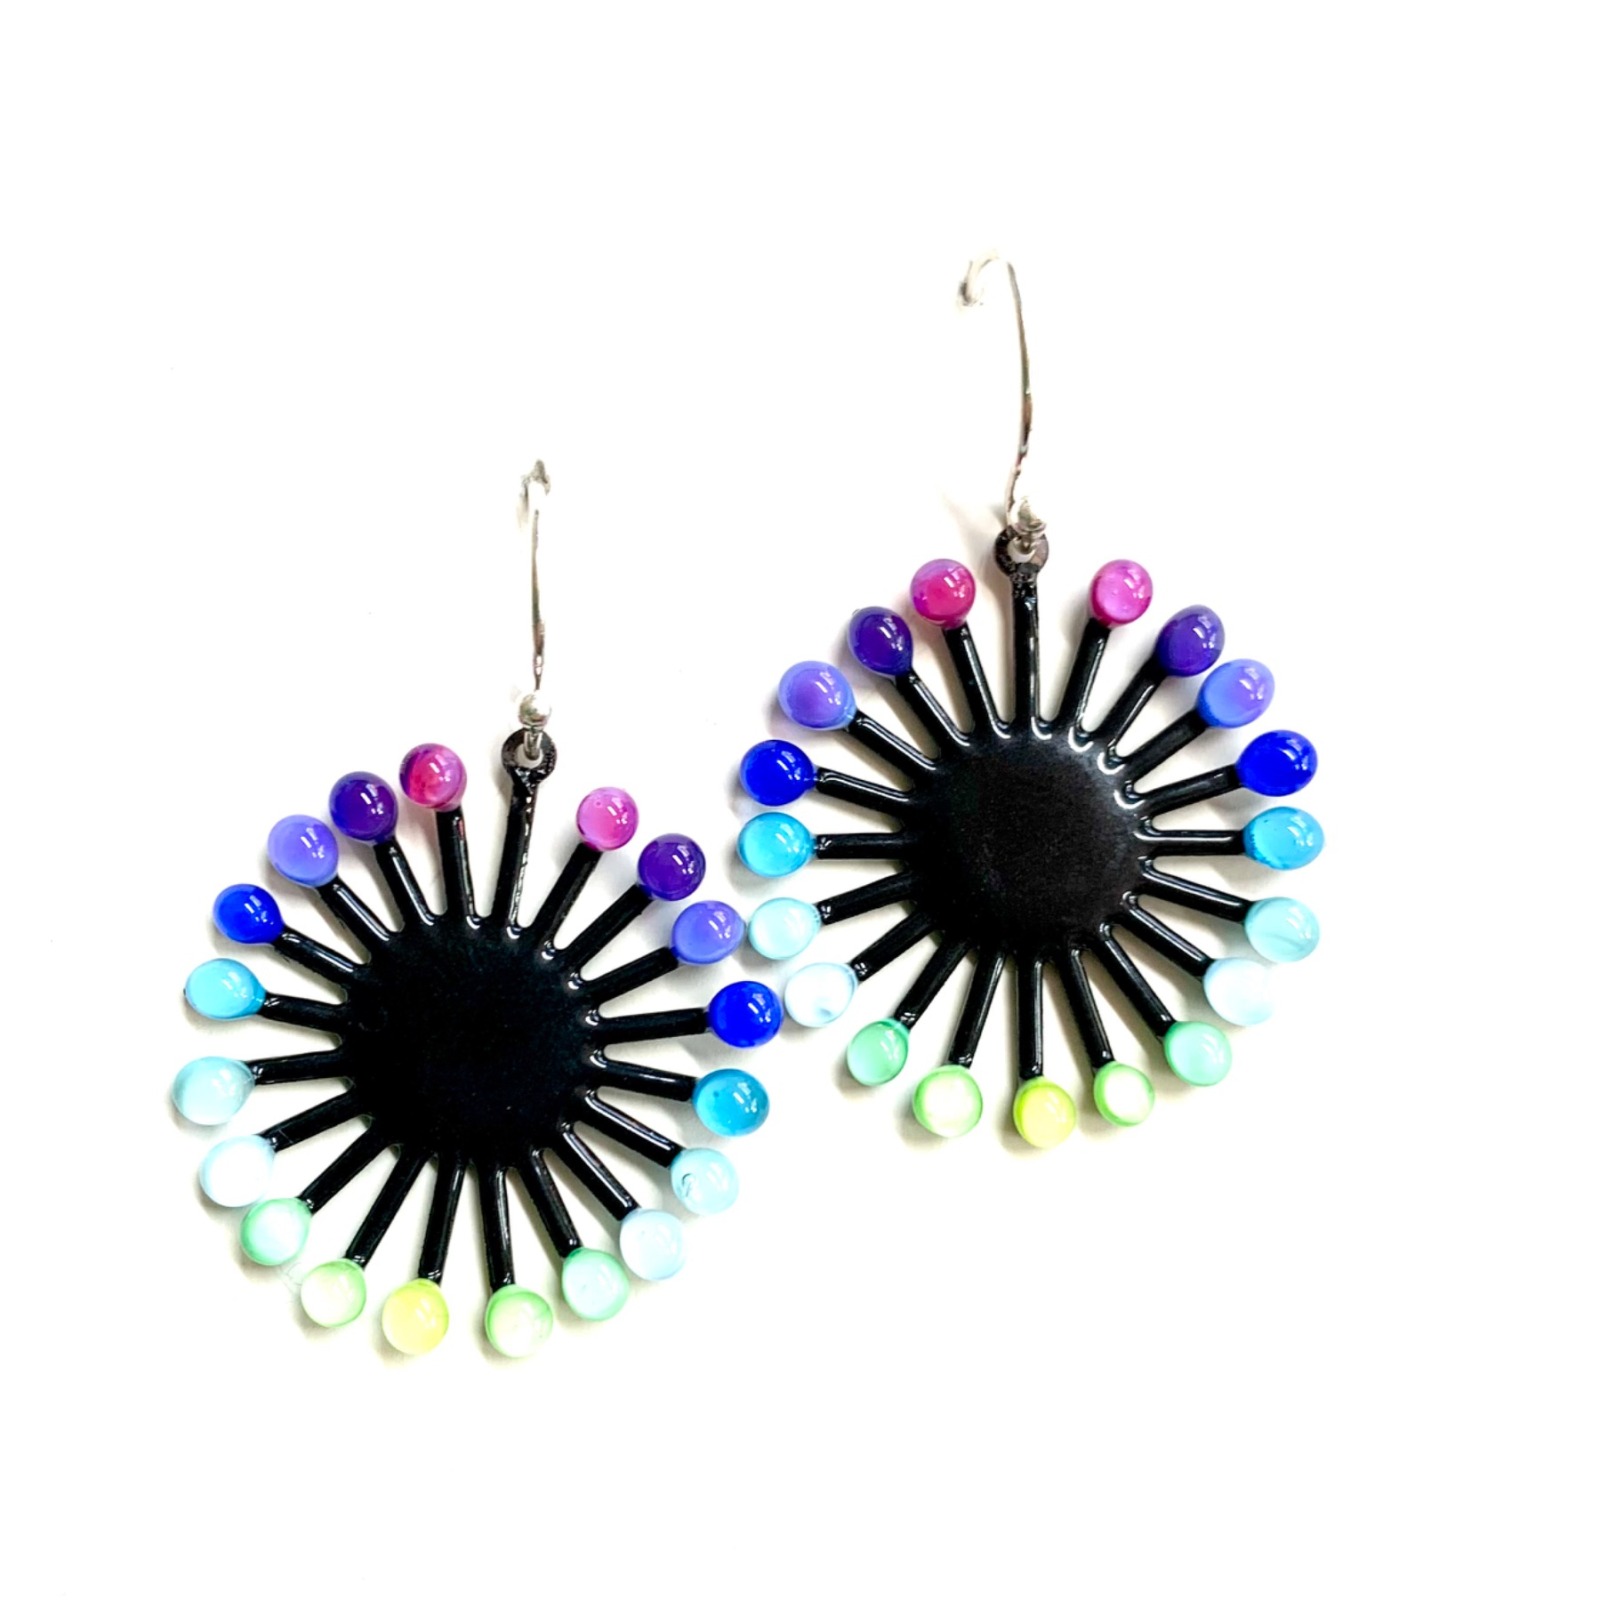 Earring Charm - Bright Rainbow Colored Dots of Glass on Black Enamel 4